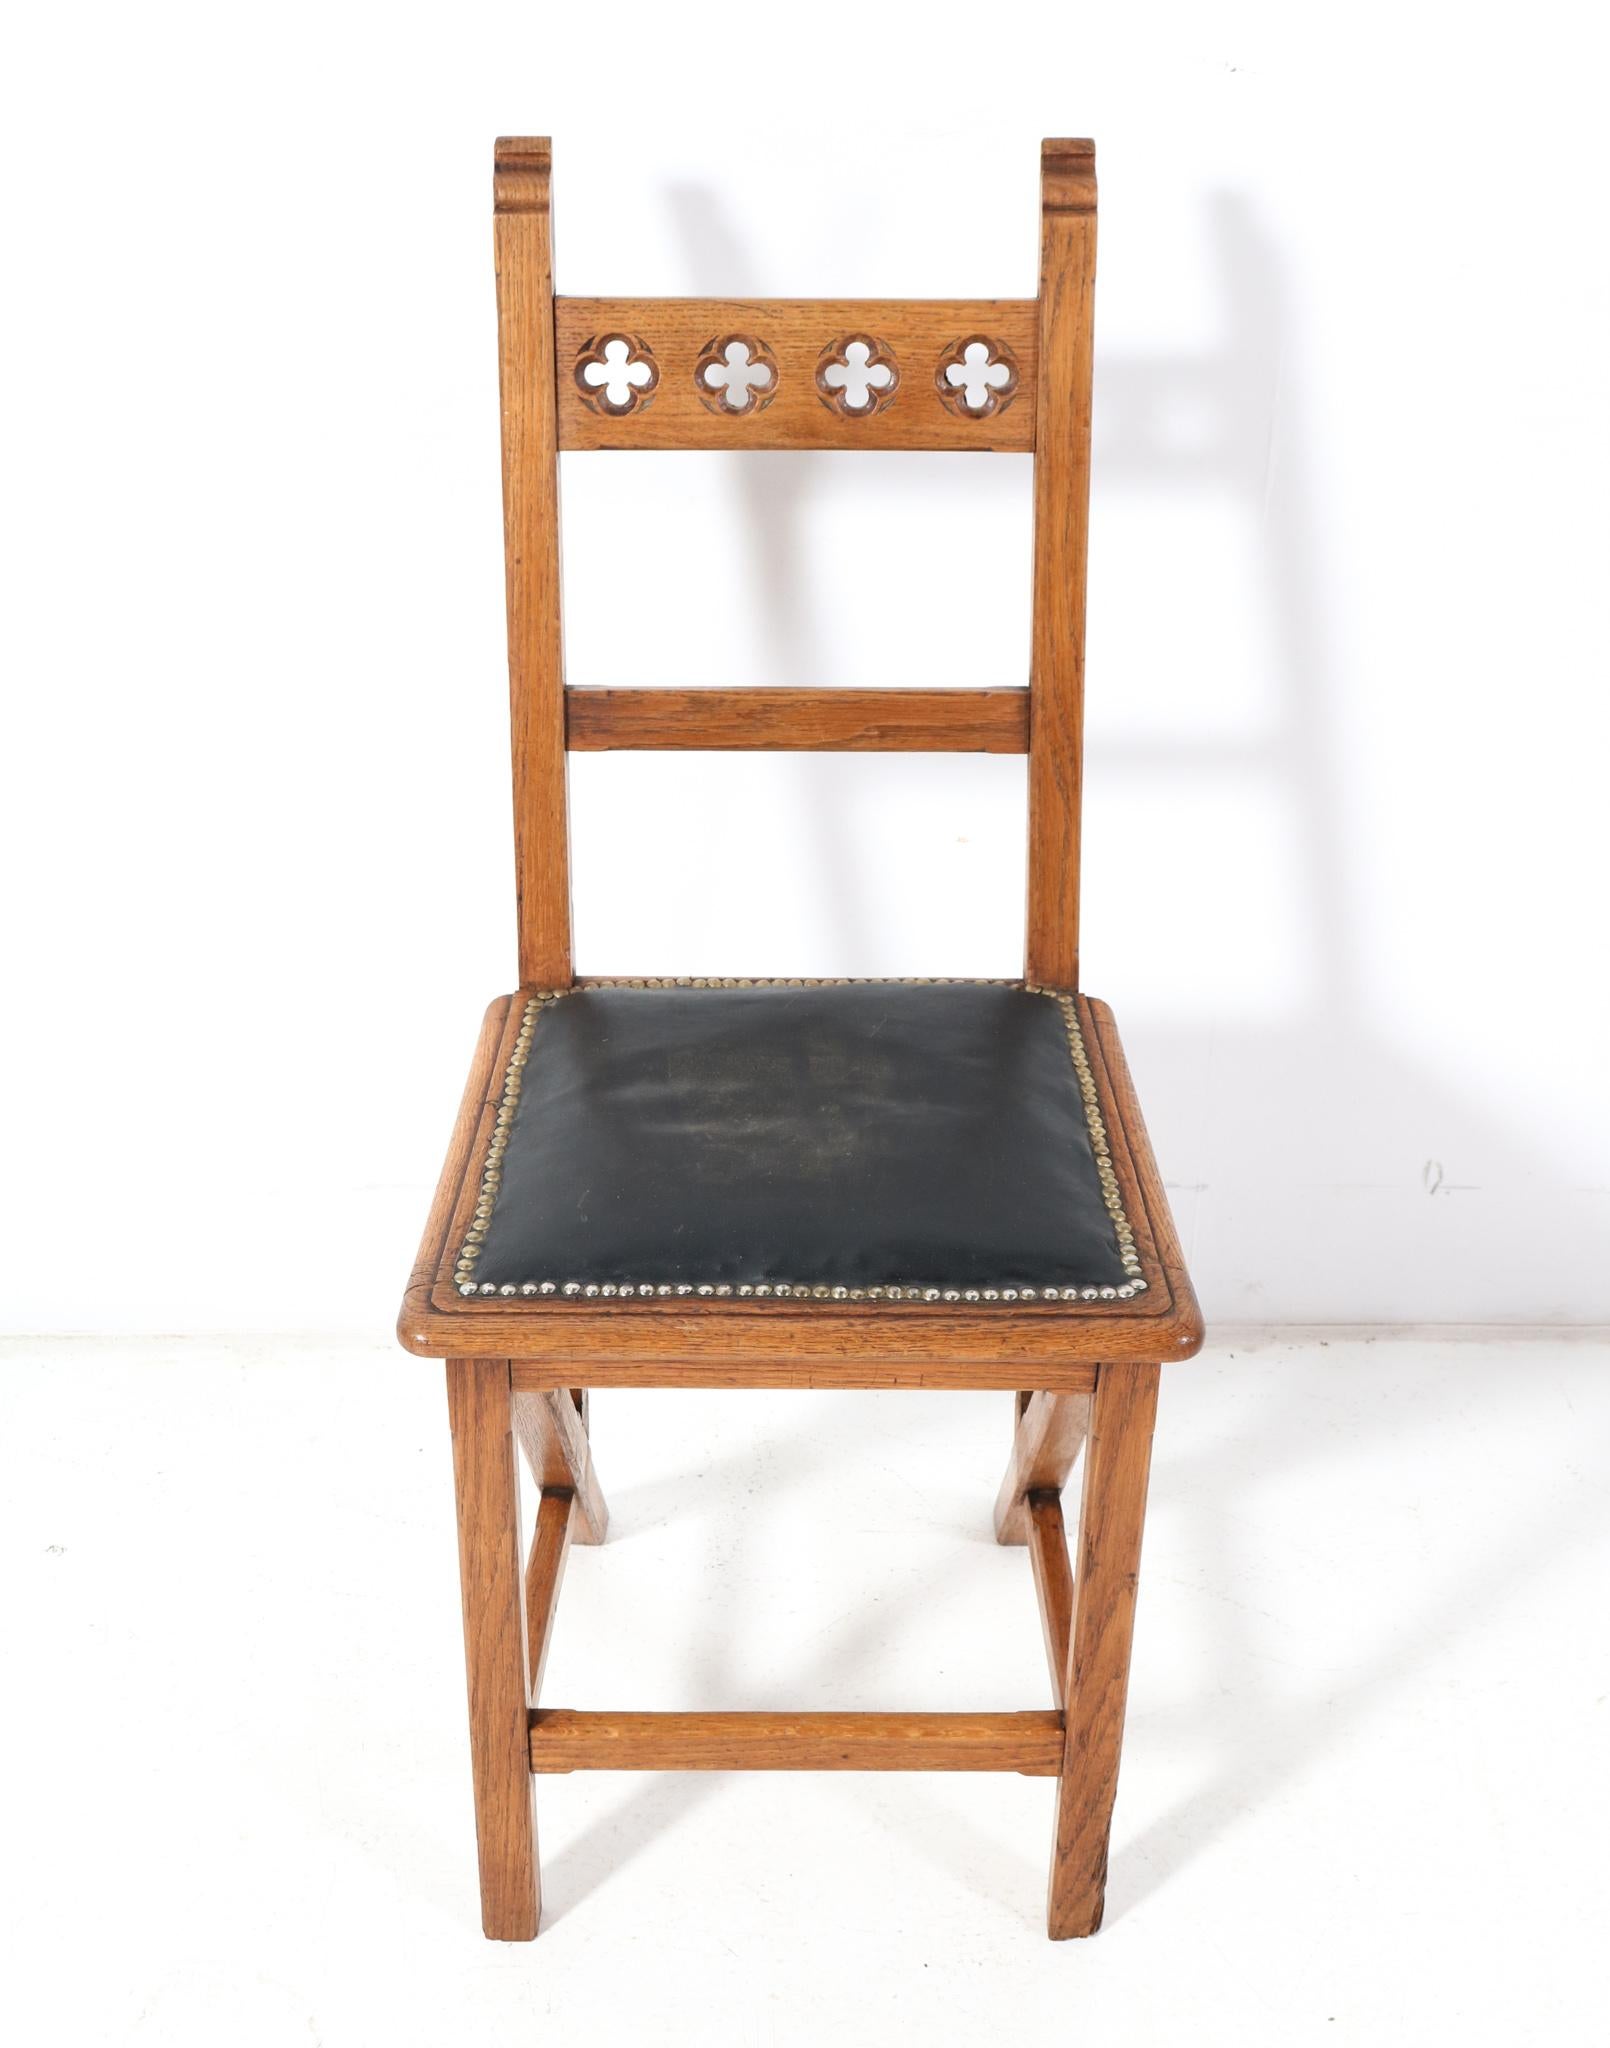 Amazing and rare Arts & Crafts Art Nouveau side chair.
Design by Hendrik Petrus Berlage.
Striking Dutch design from the 1900s.
Solid oak with hand-carved decorations in the back.
Original faux leather upholstery.
The A-construction of the legs